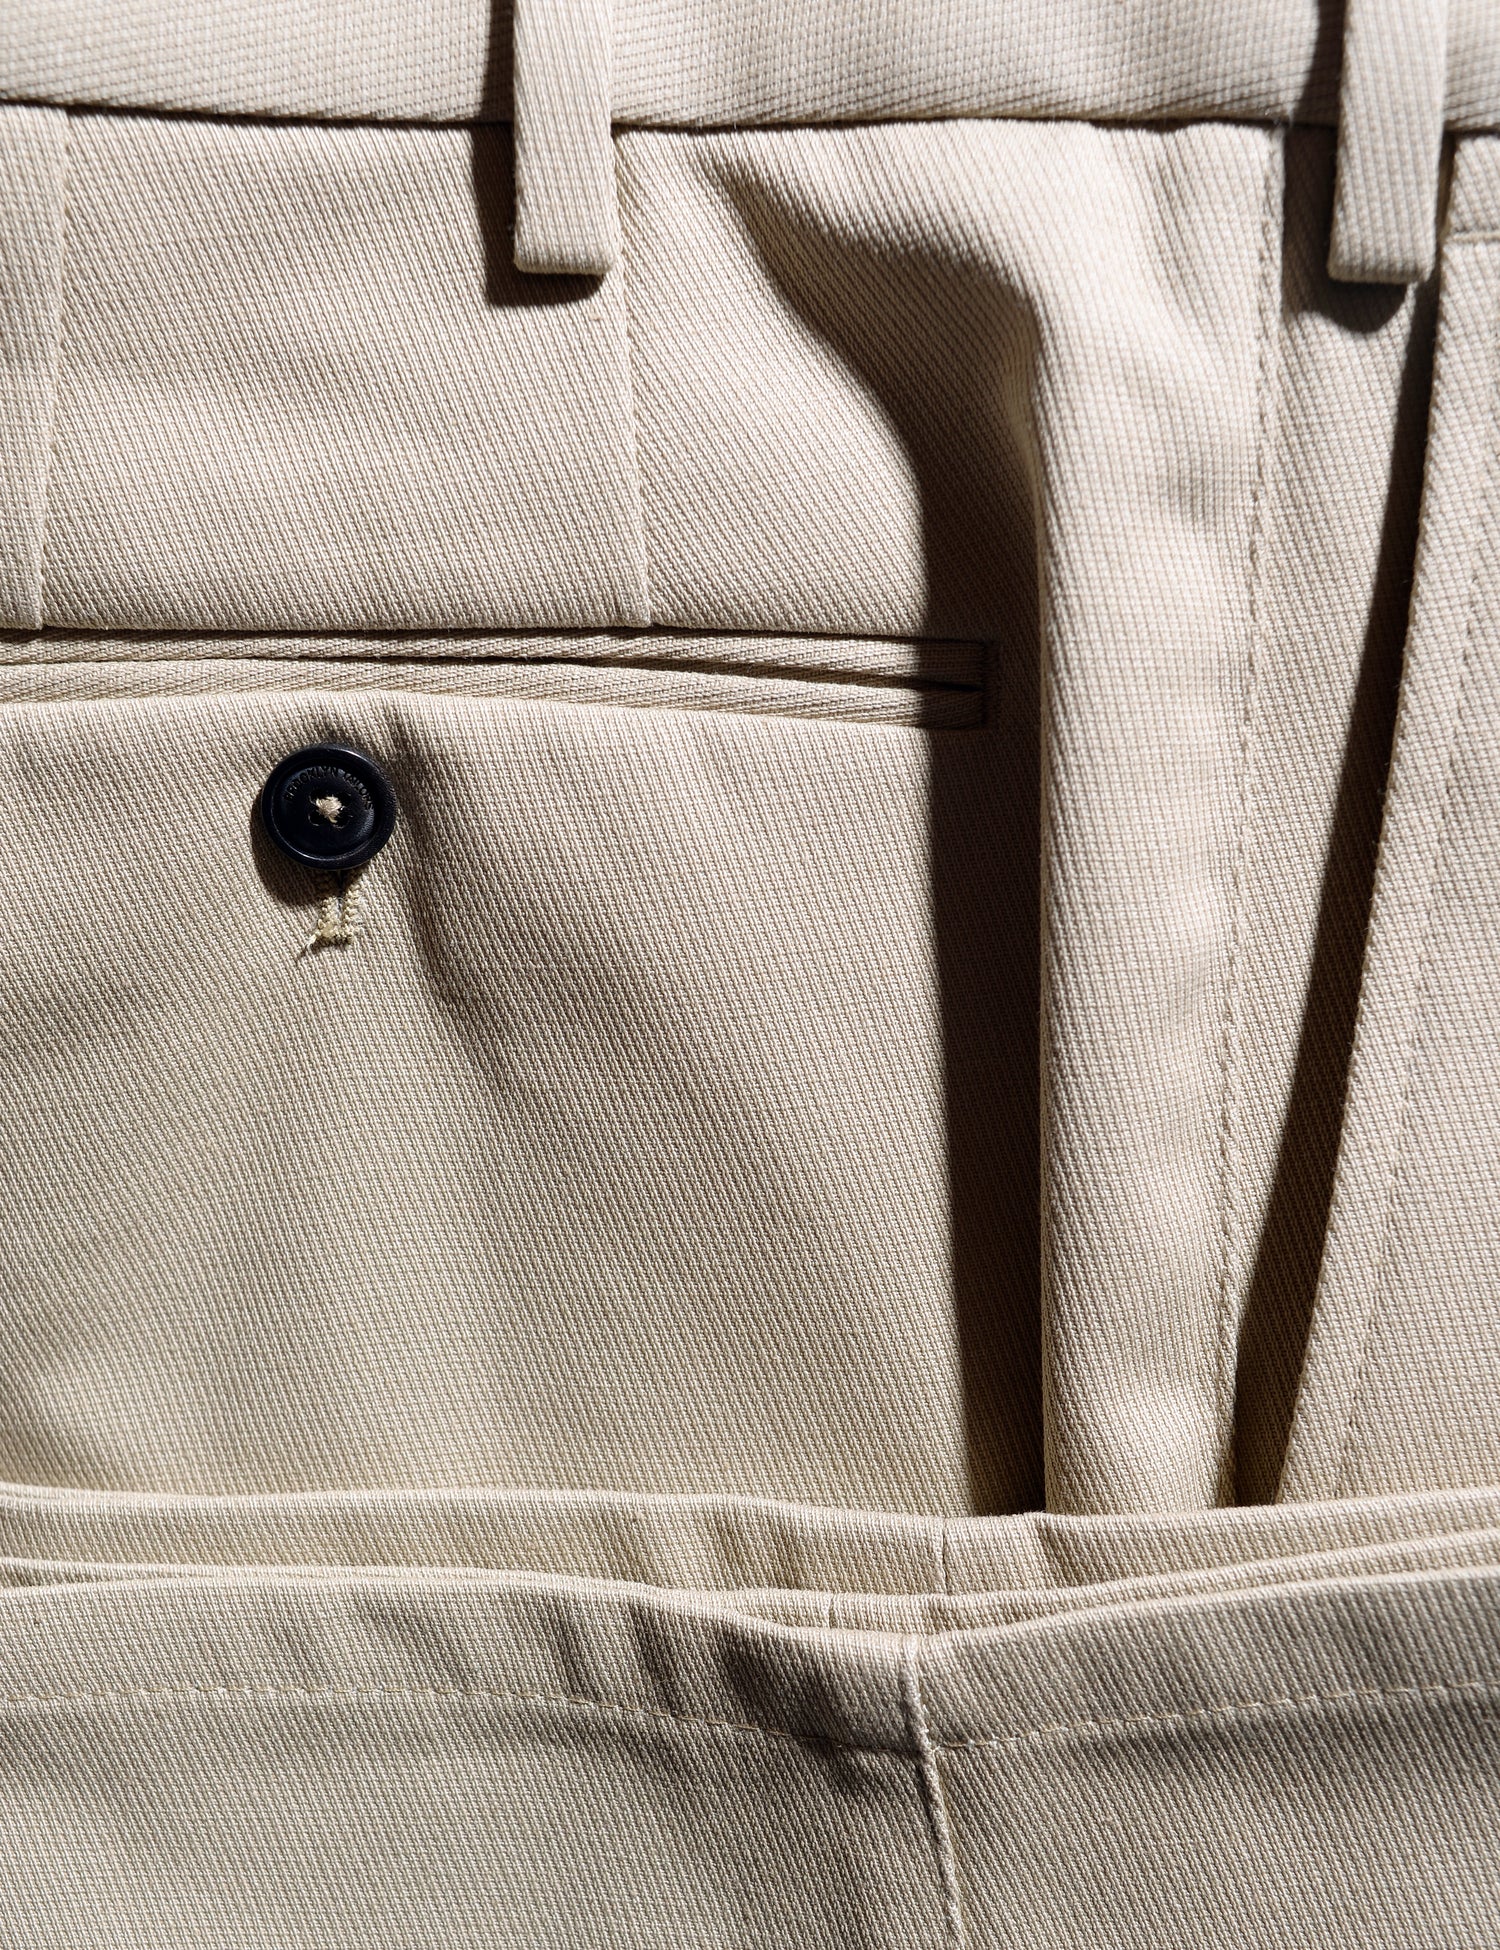 Detail shot of back pocket, waistband, and hem of Brooklyn Tailors BKT36 Straight Leg Pant in Cotton Cavalry Twill - Sand